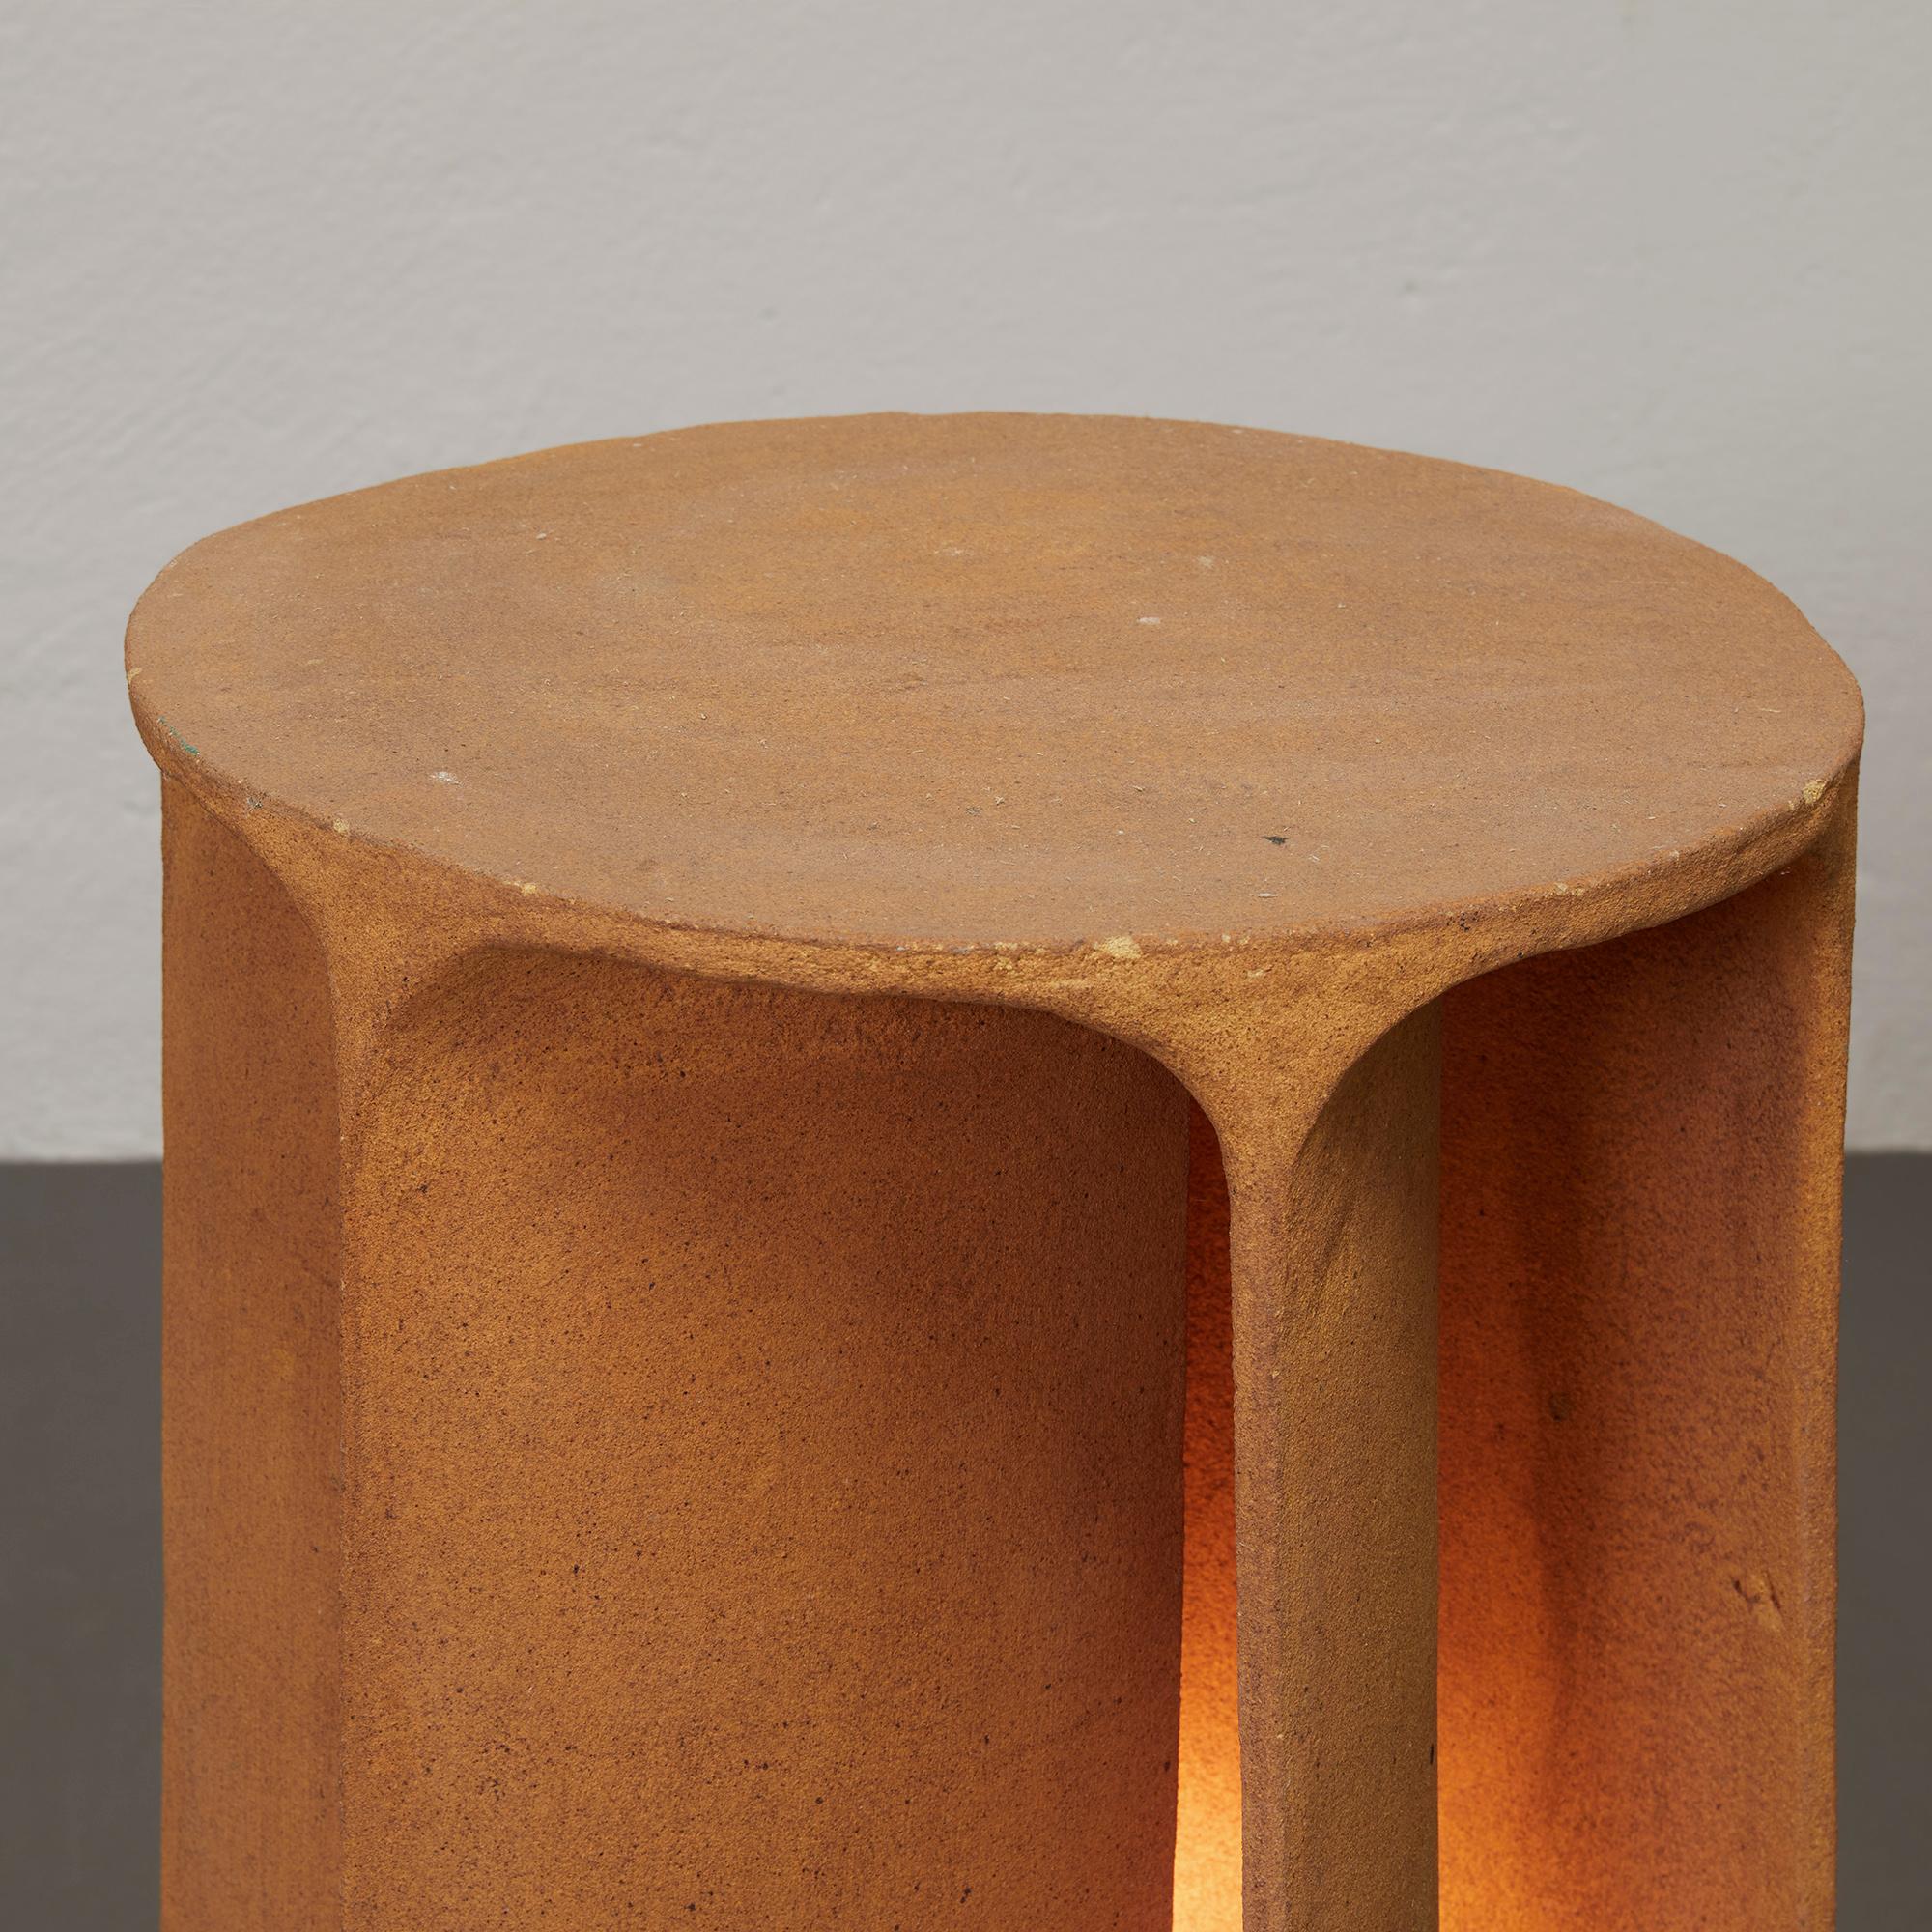 Earthenware Illuminated Lighting Sculpture or Table Lamp by Guy Bareff, France c. 1970 For Sale